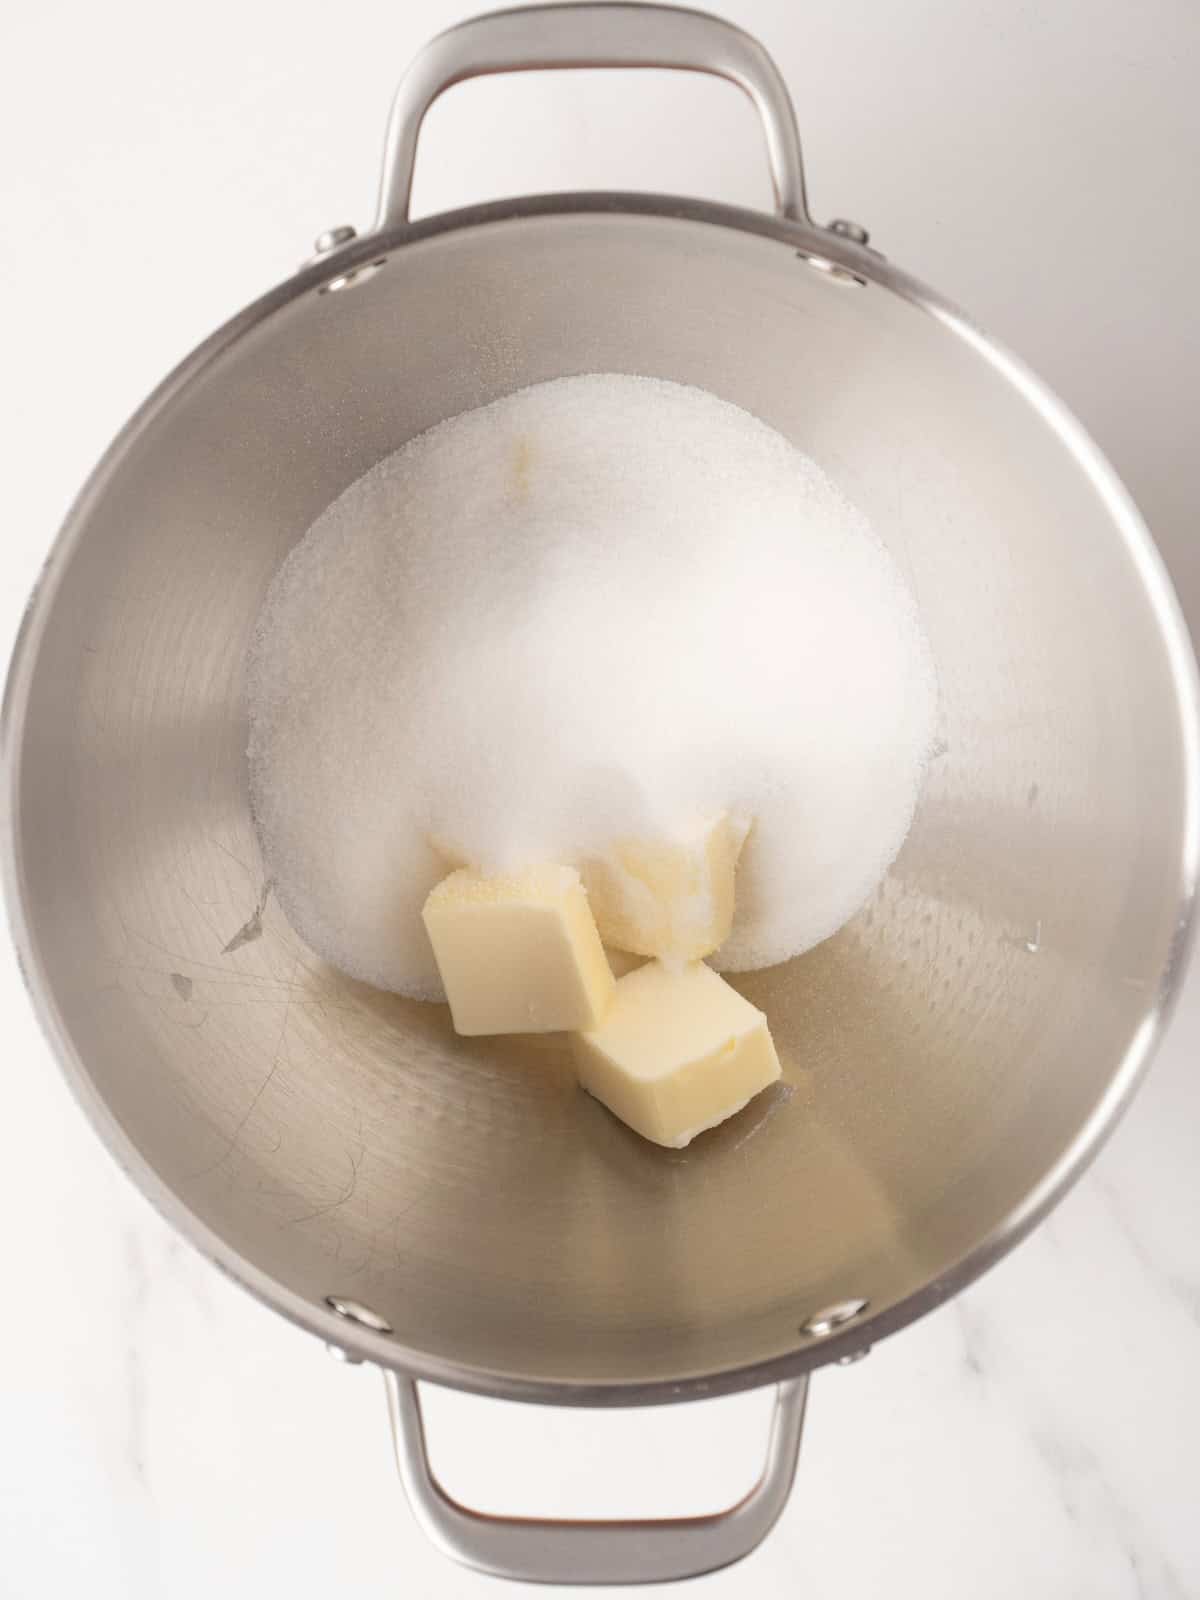 A stand mixer bowl with white sugar and butter.